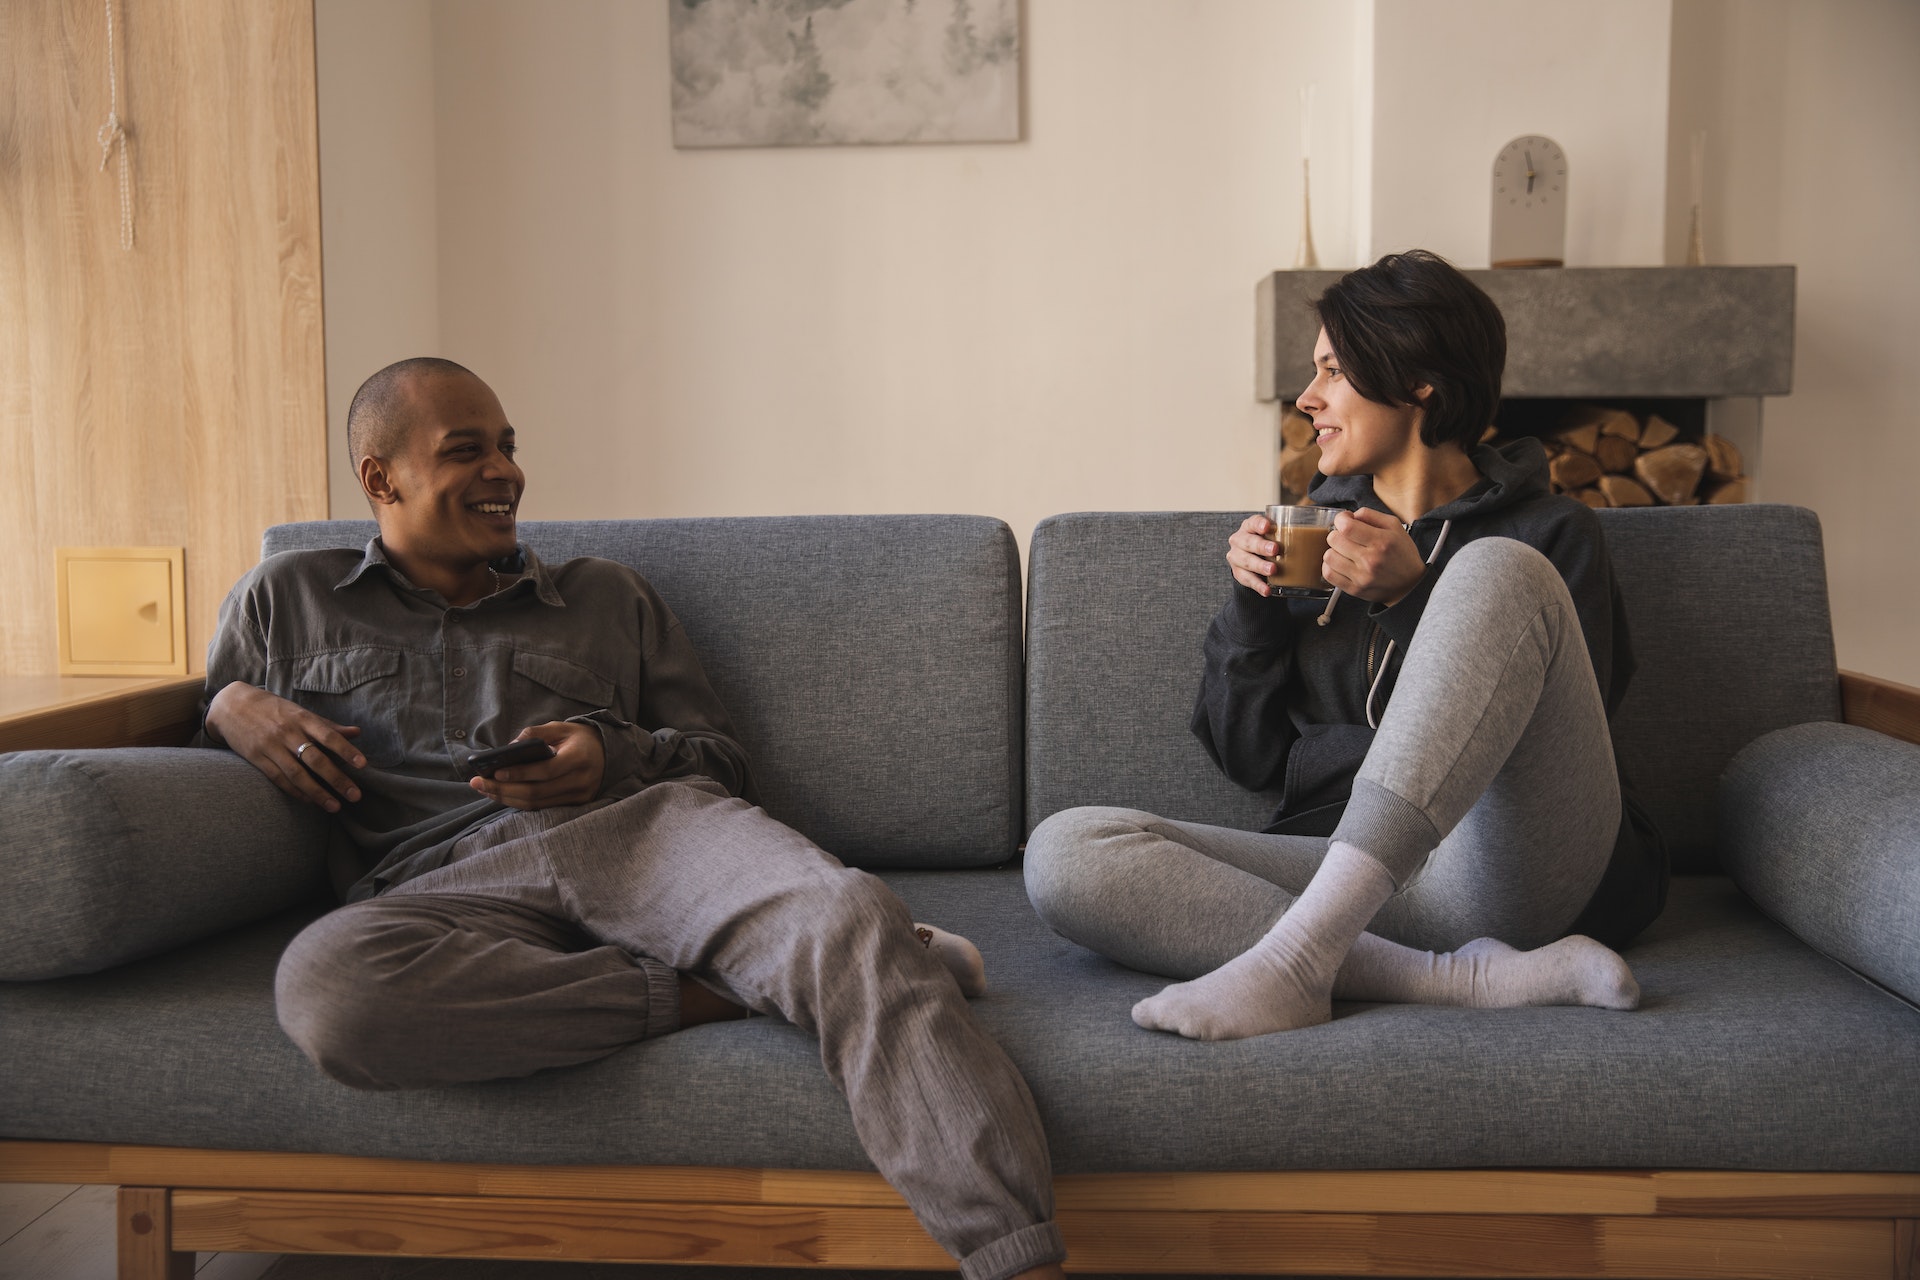 A couple talking on the couch | Source: Pexels